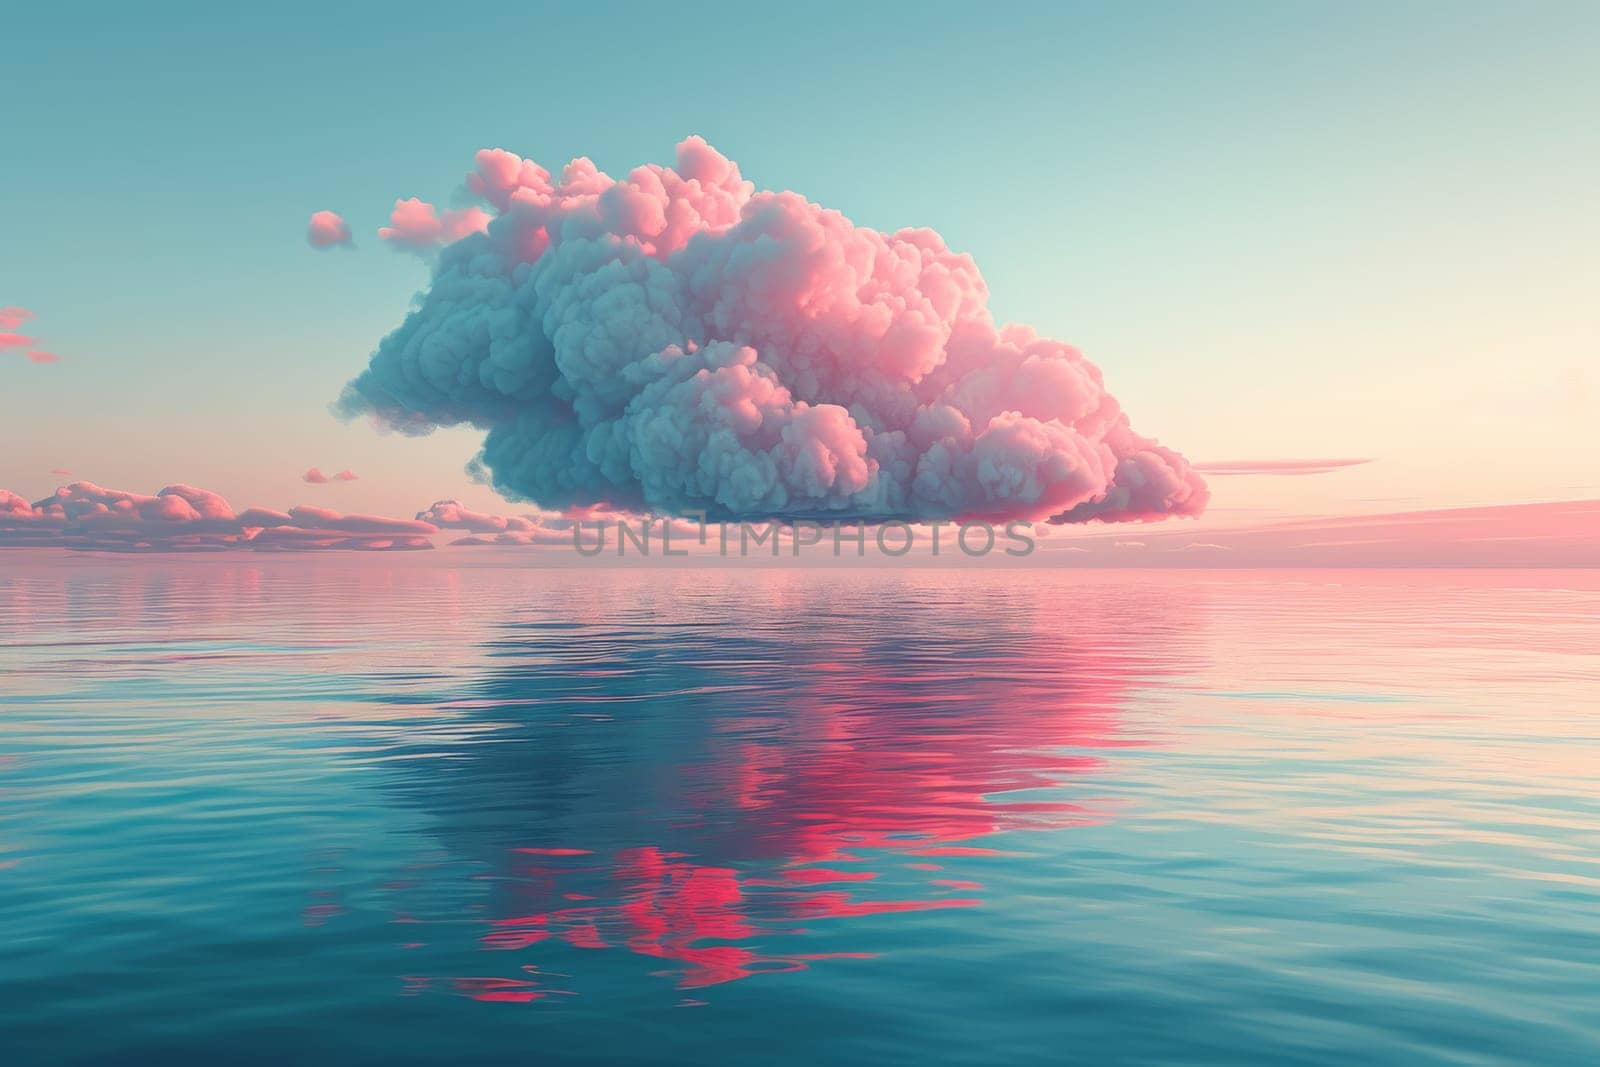 A large pink cloud is floating over the ocean by itchaznong